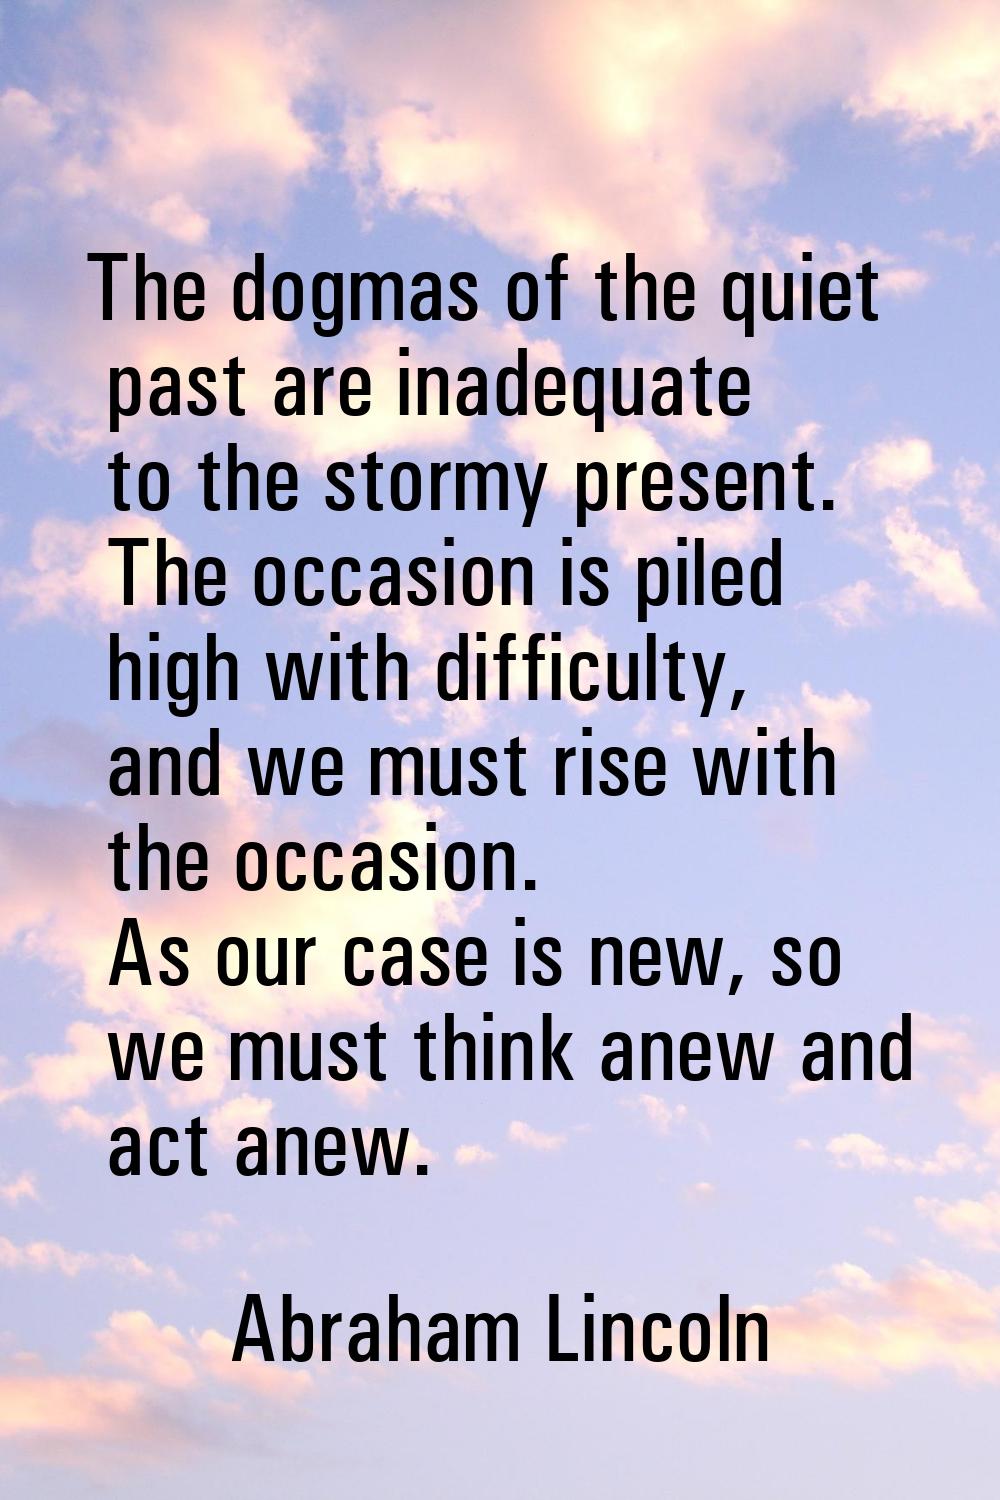 The dogmas of the quiet past are inadequate to the stormy present. The occasion is piled high with 